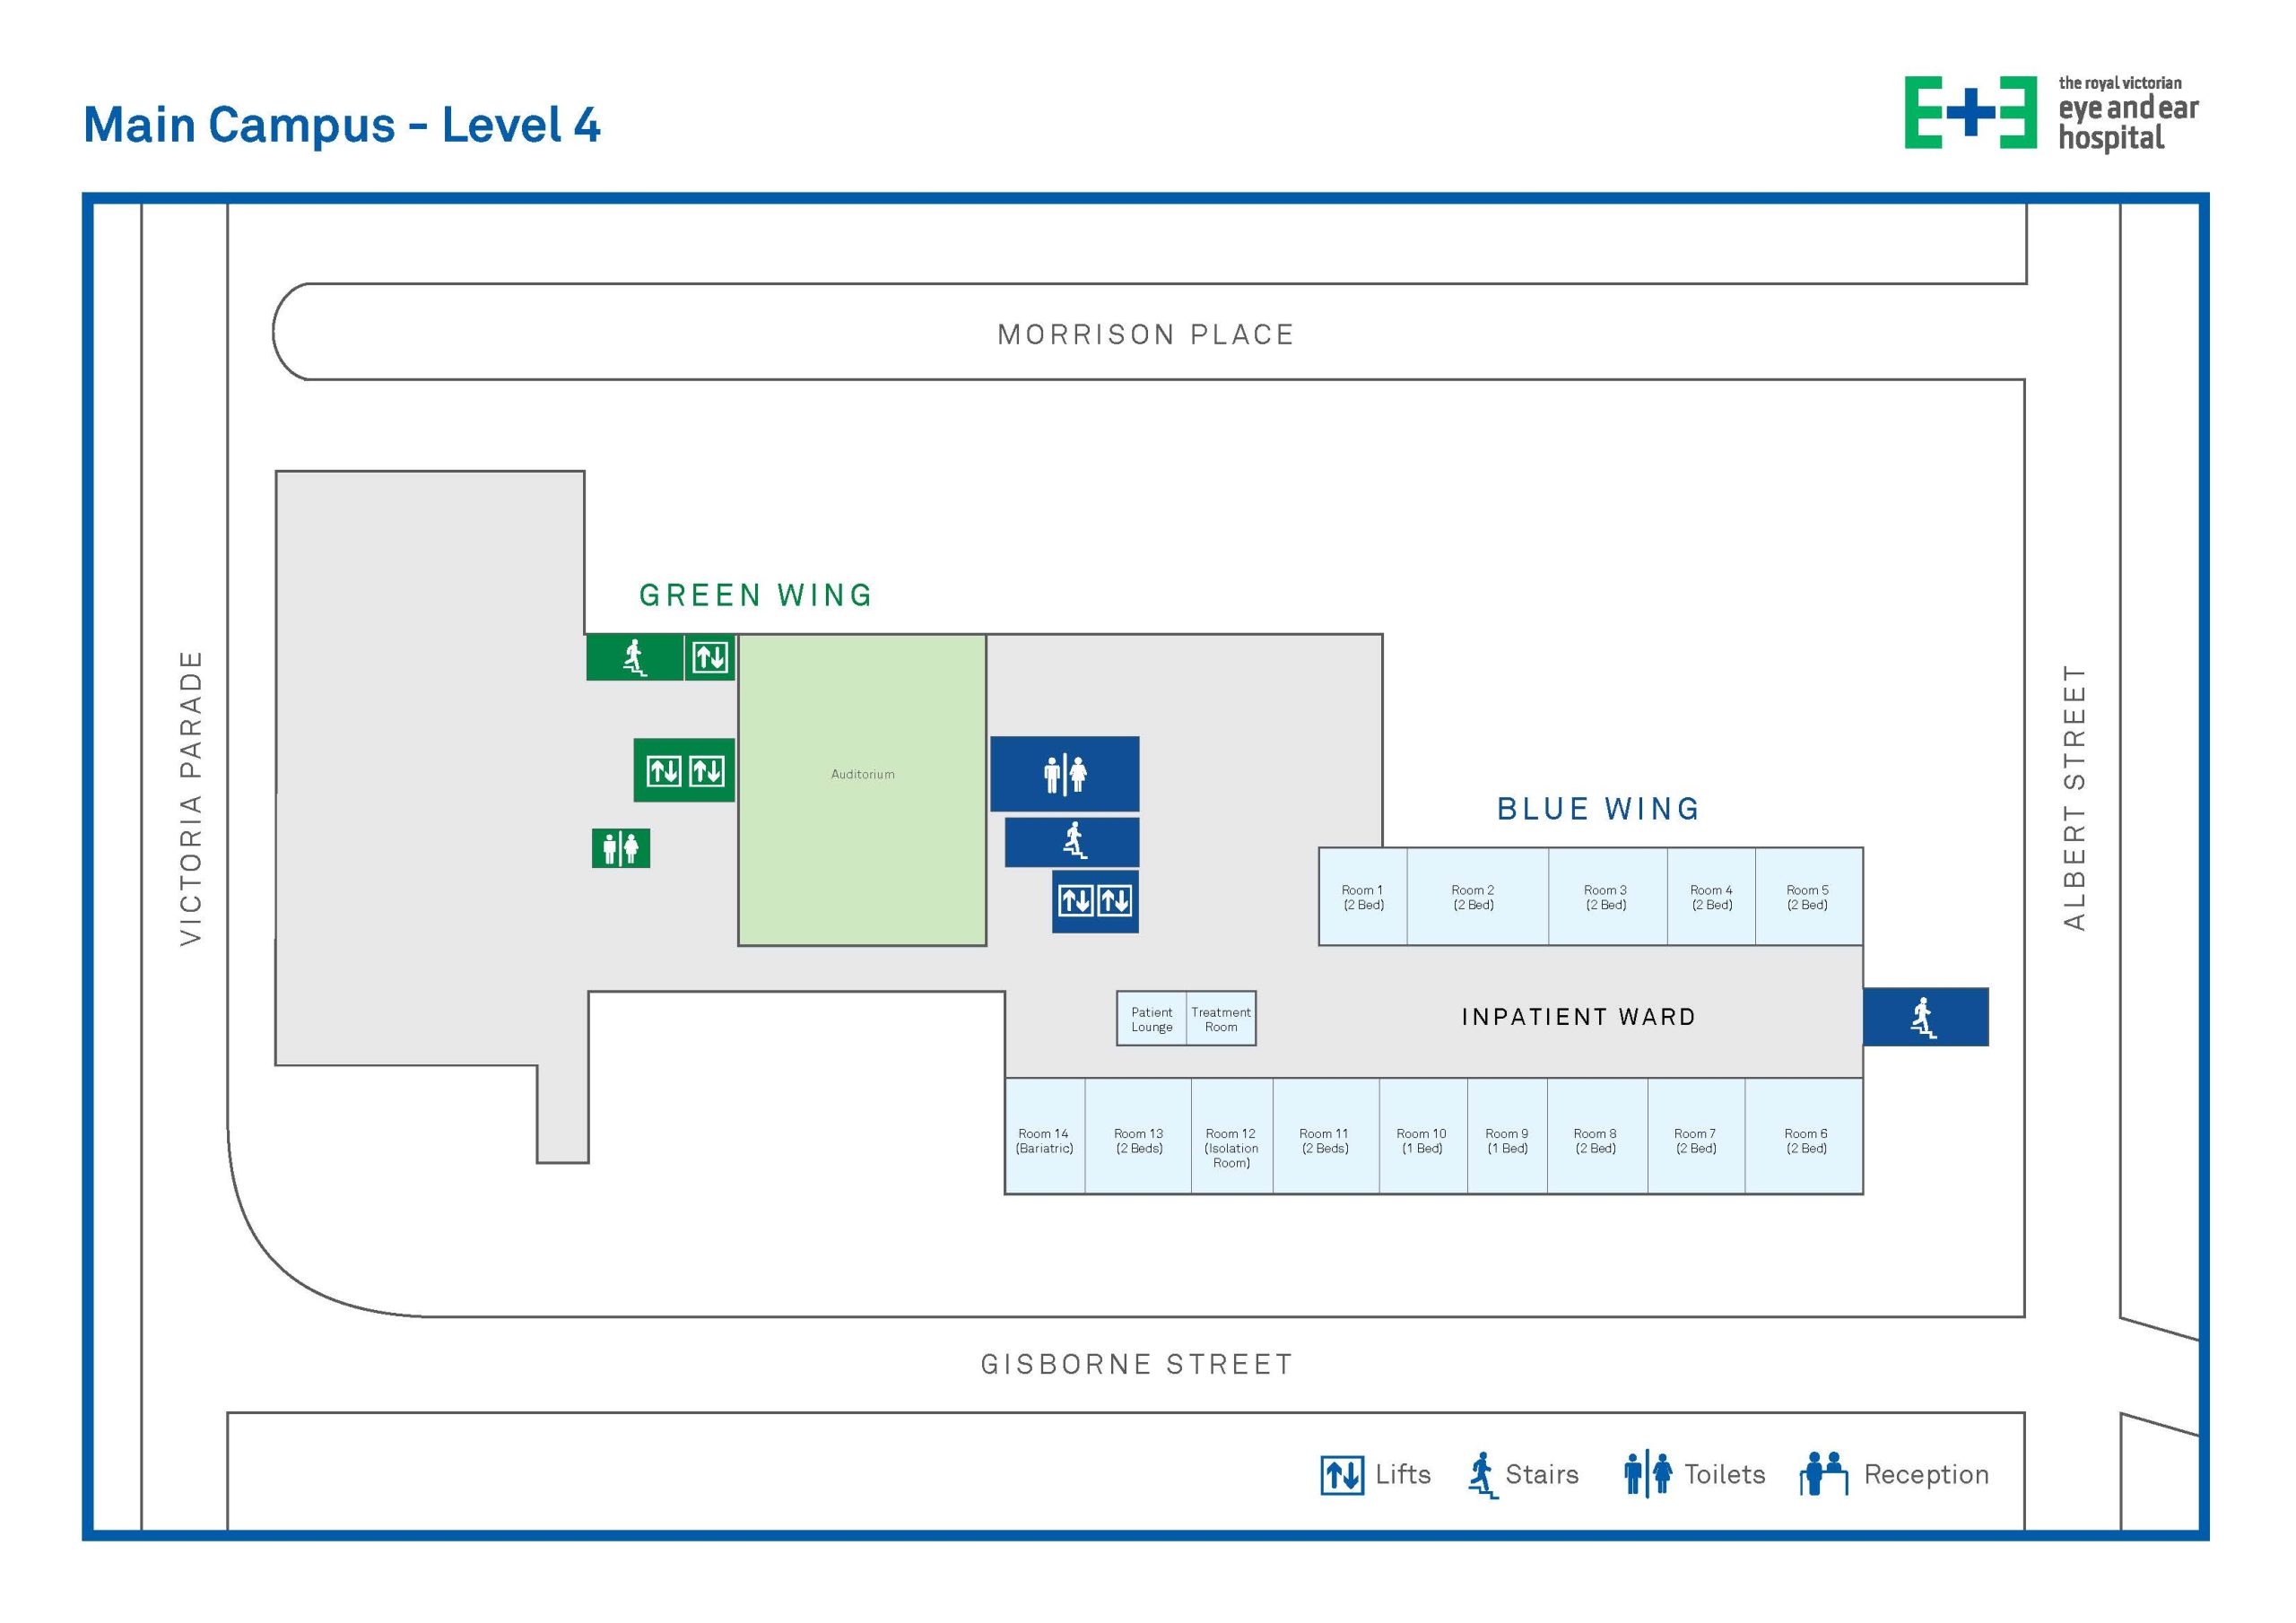 Simplified map of level 4 of the hospital.